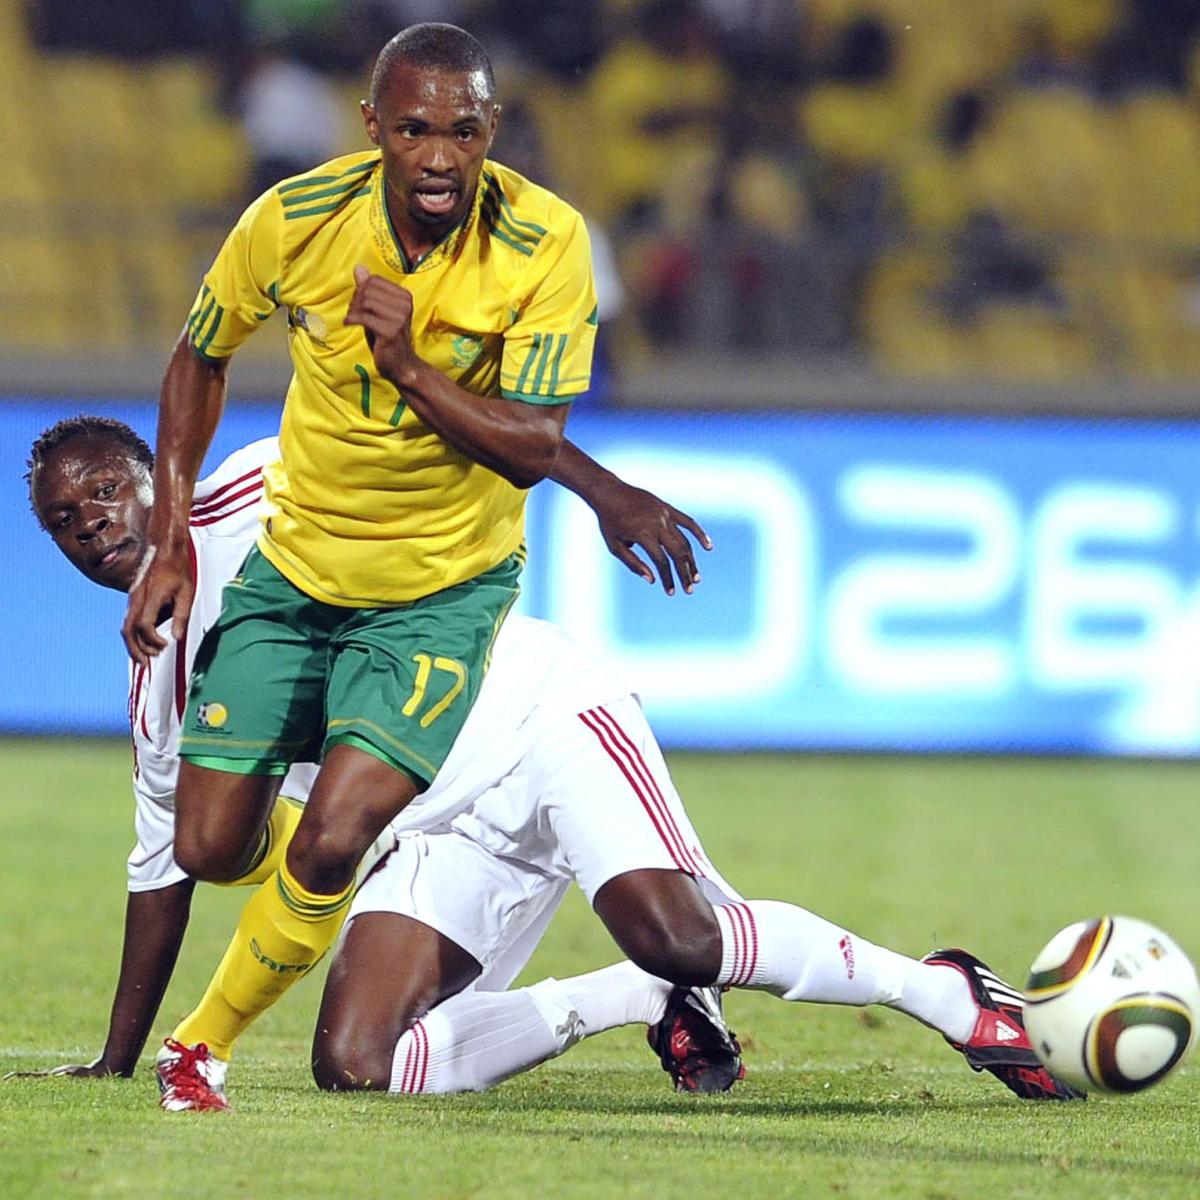 African Cup of Nations 2013 TV Schedule: Day 1 Live Stream Info and